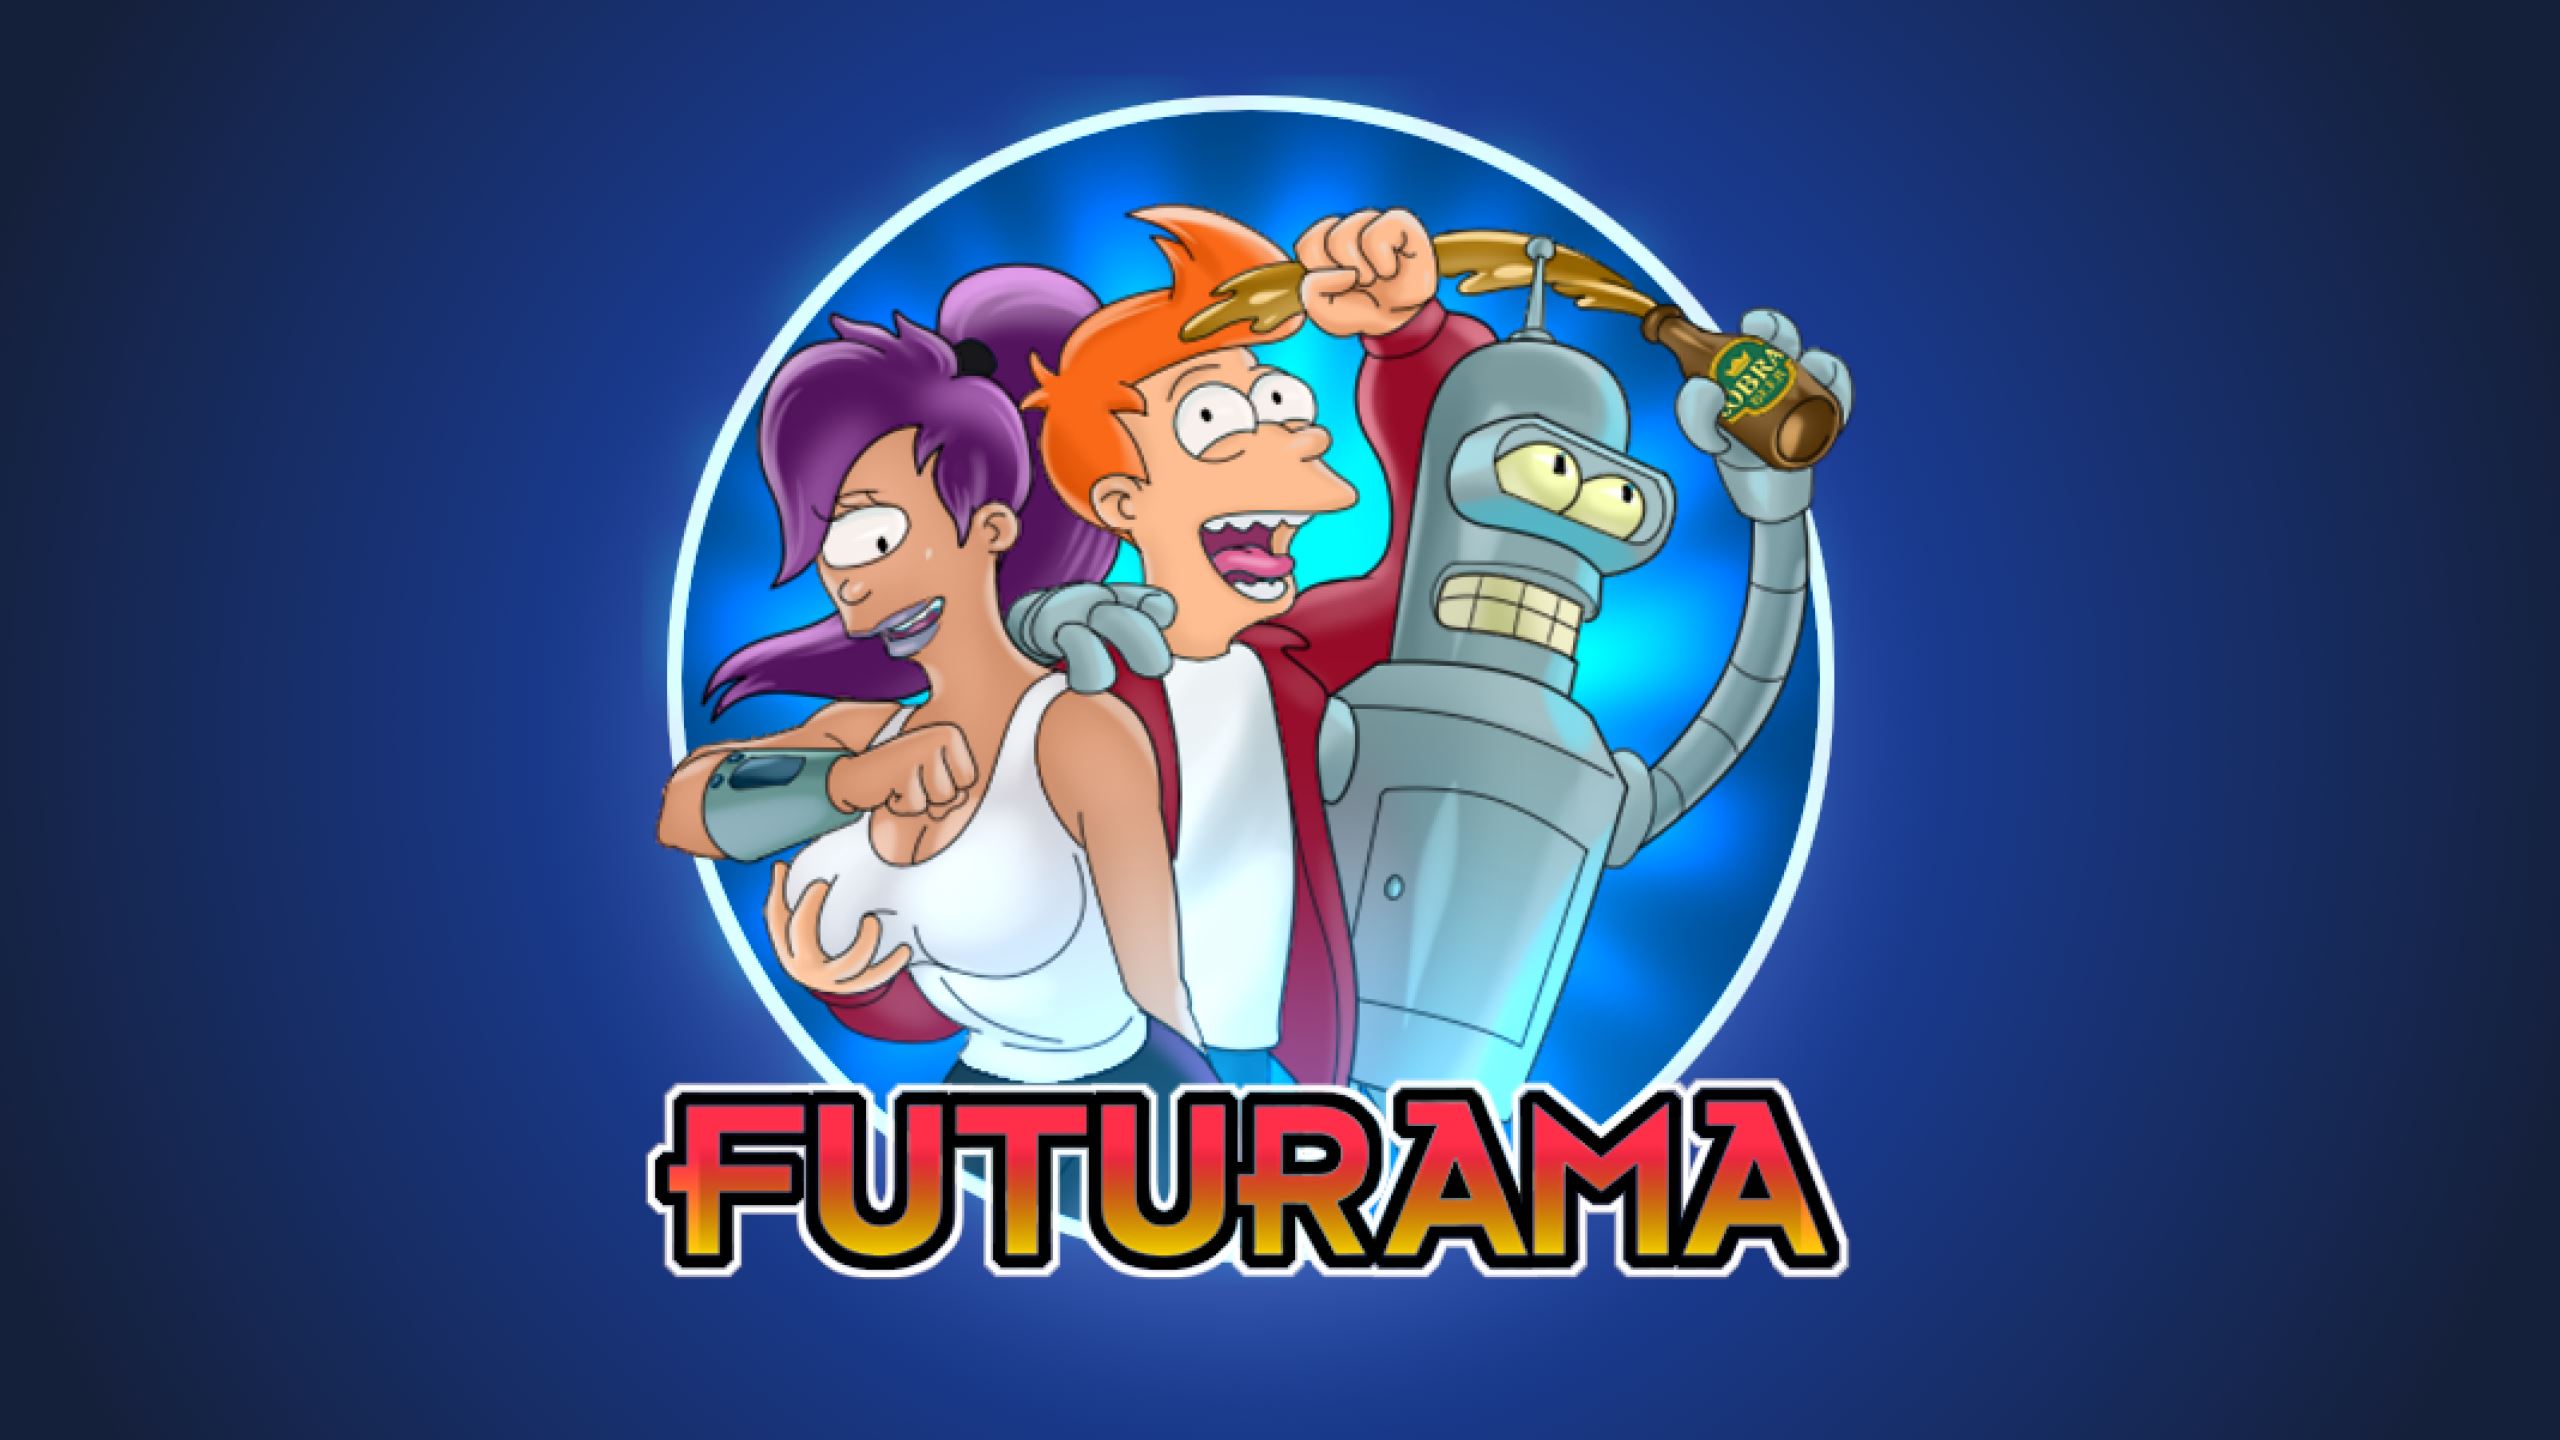 Futarama Porn - Ren'Py] Futurama: Lust in Space - v0.19.9 by Do-Hicky Games 18+ Adult xxx  Porn Game Download